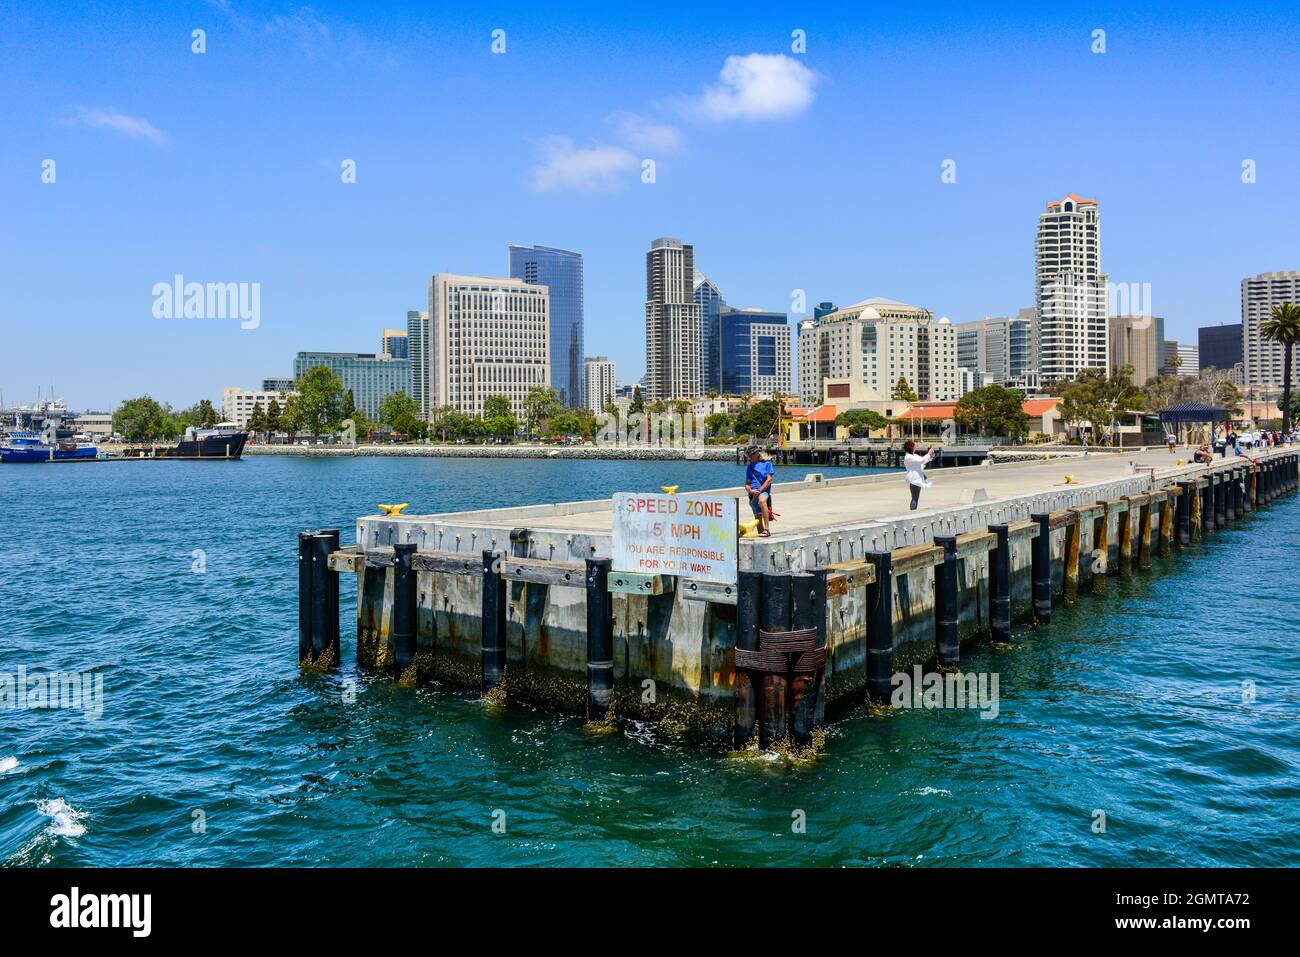 People enjoying the San Diego Bay views from pier and dock areas of the San Diego Harbor with a background of high-rise buildings, San Diego, CA Stock Photo